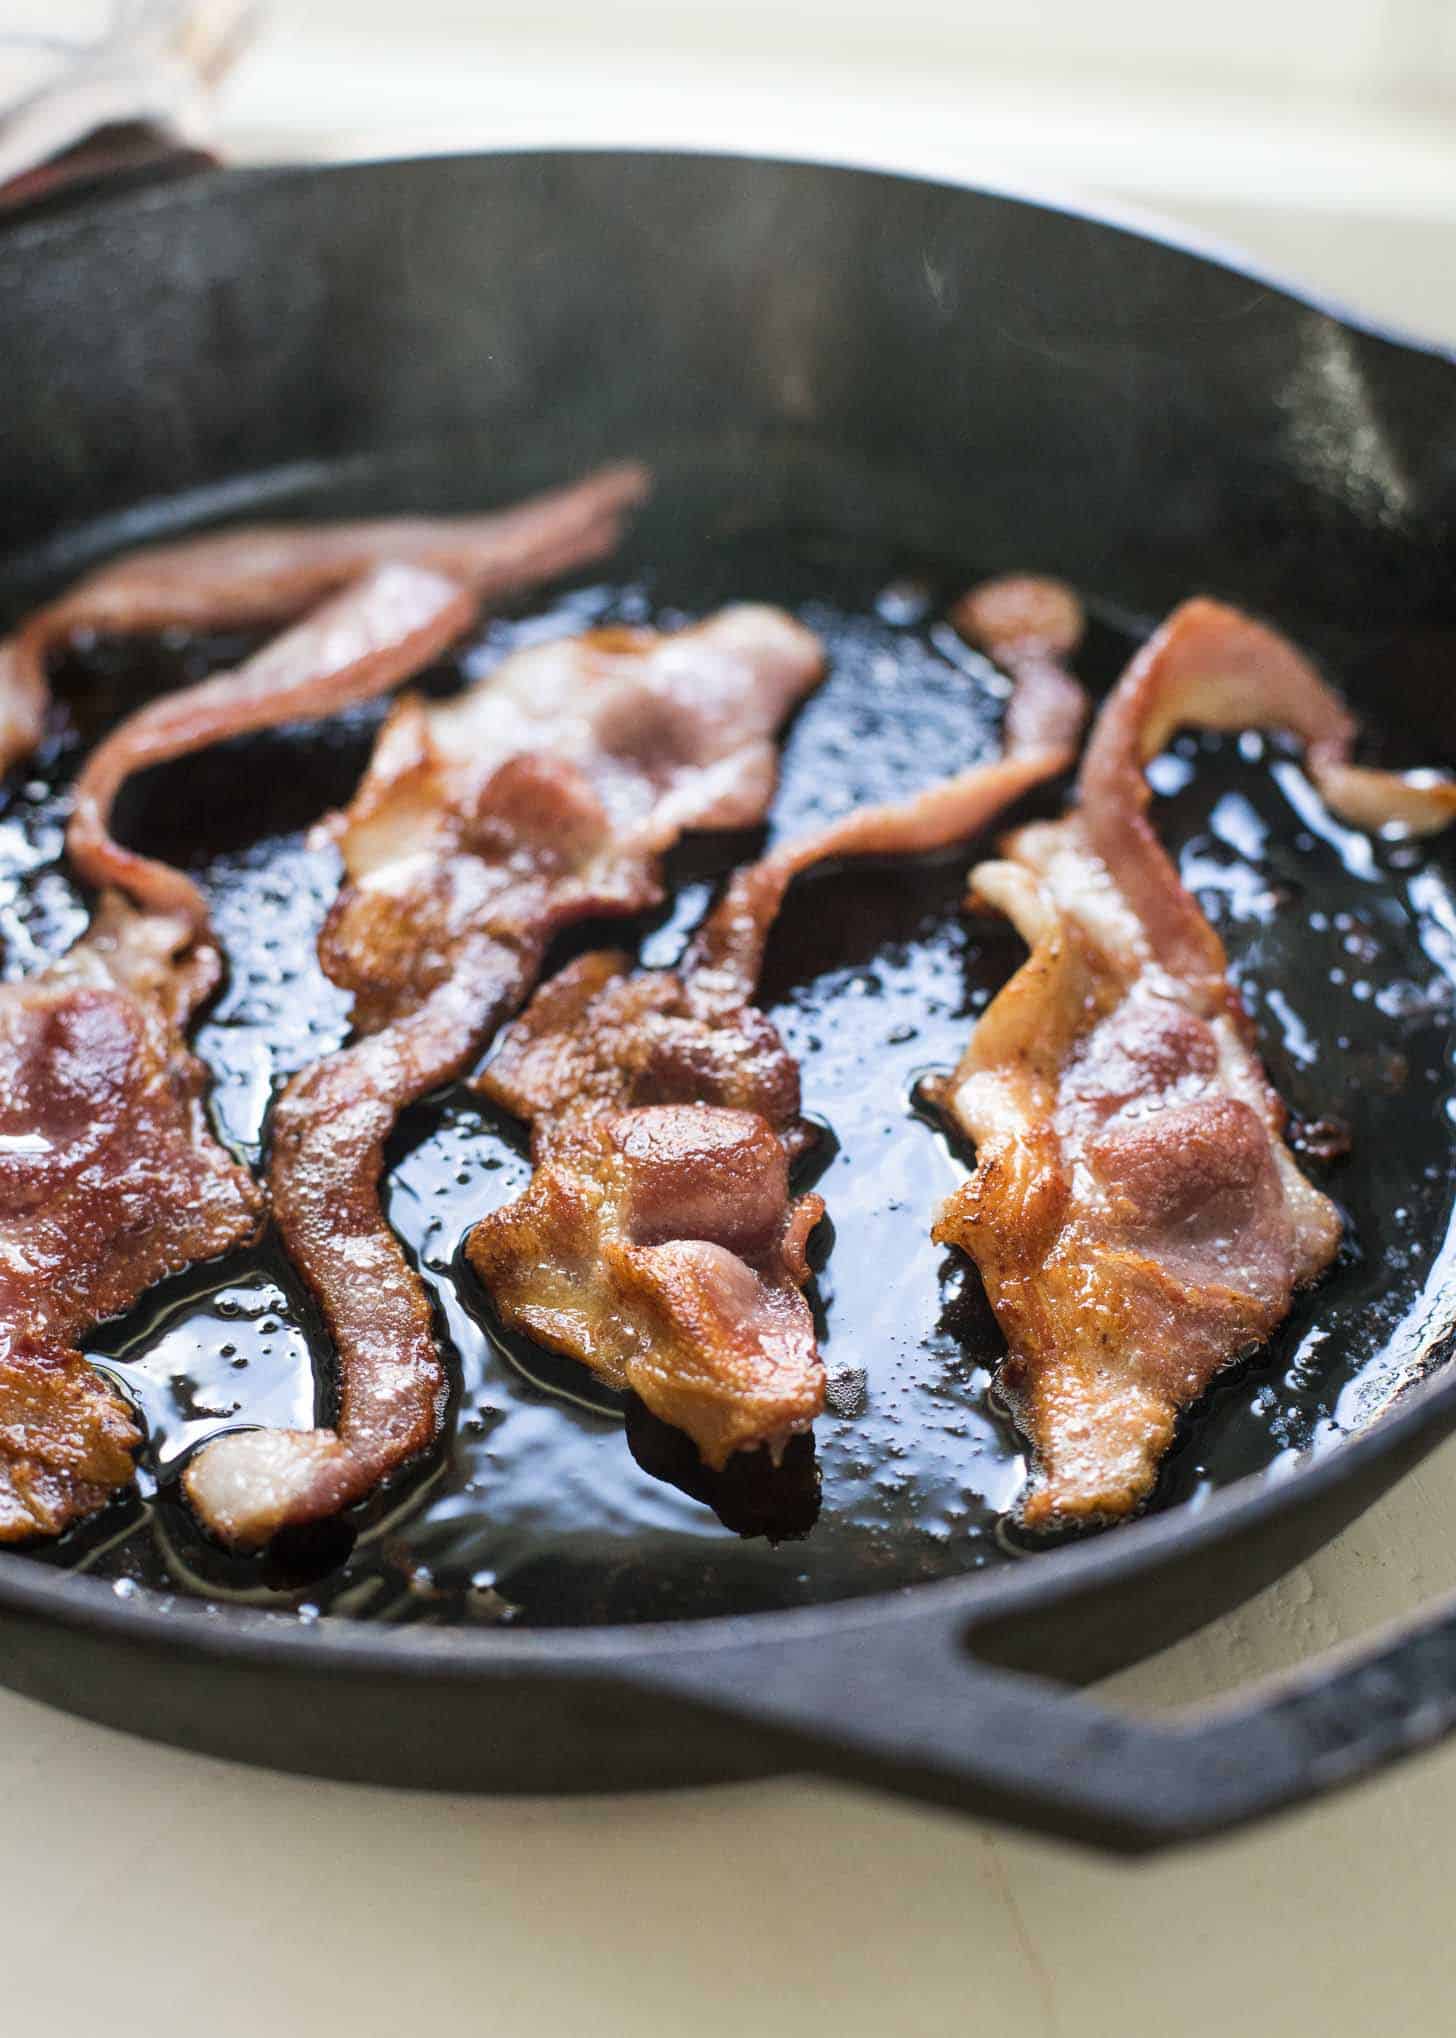 cooking bacon in a cast iron skillet